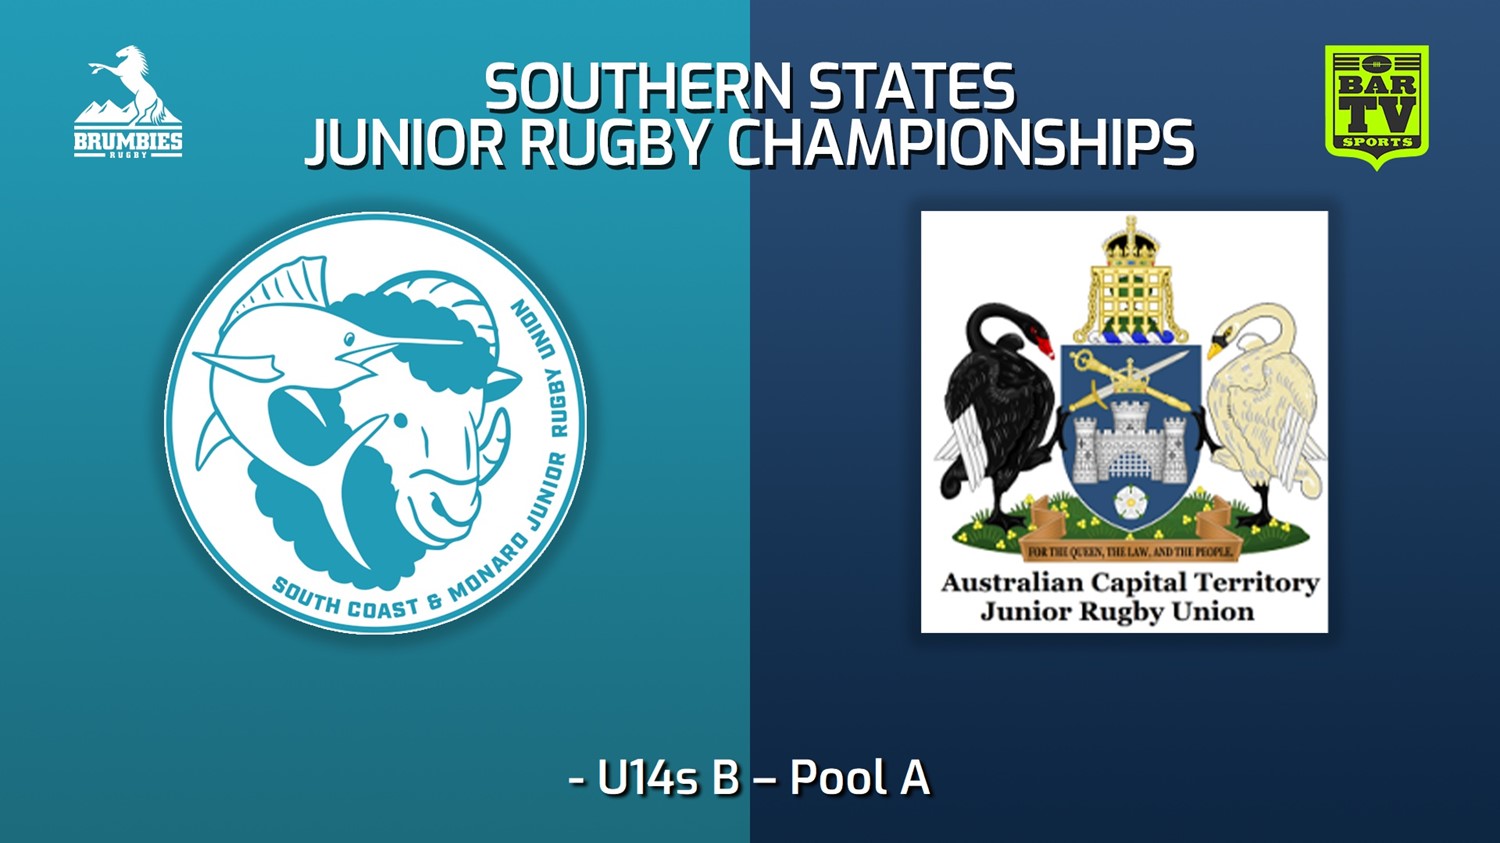 220713-2022 Southern States Junior Rugby Championships U14s B – Pool A - South Coast-Monaro v ACT Juniors Slate Image